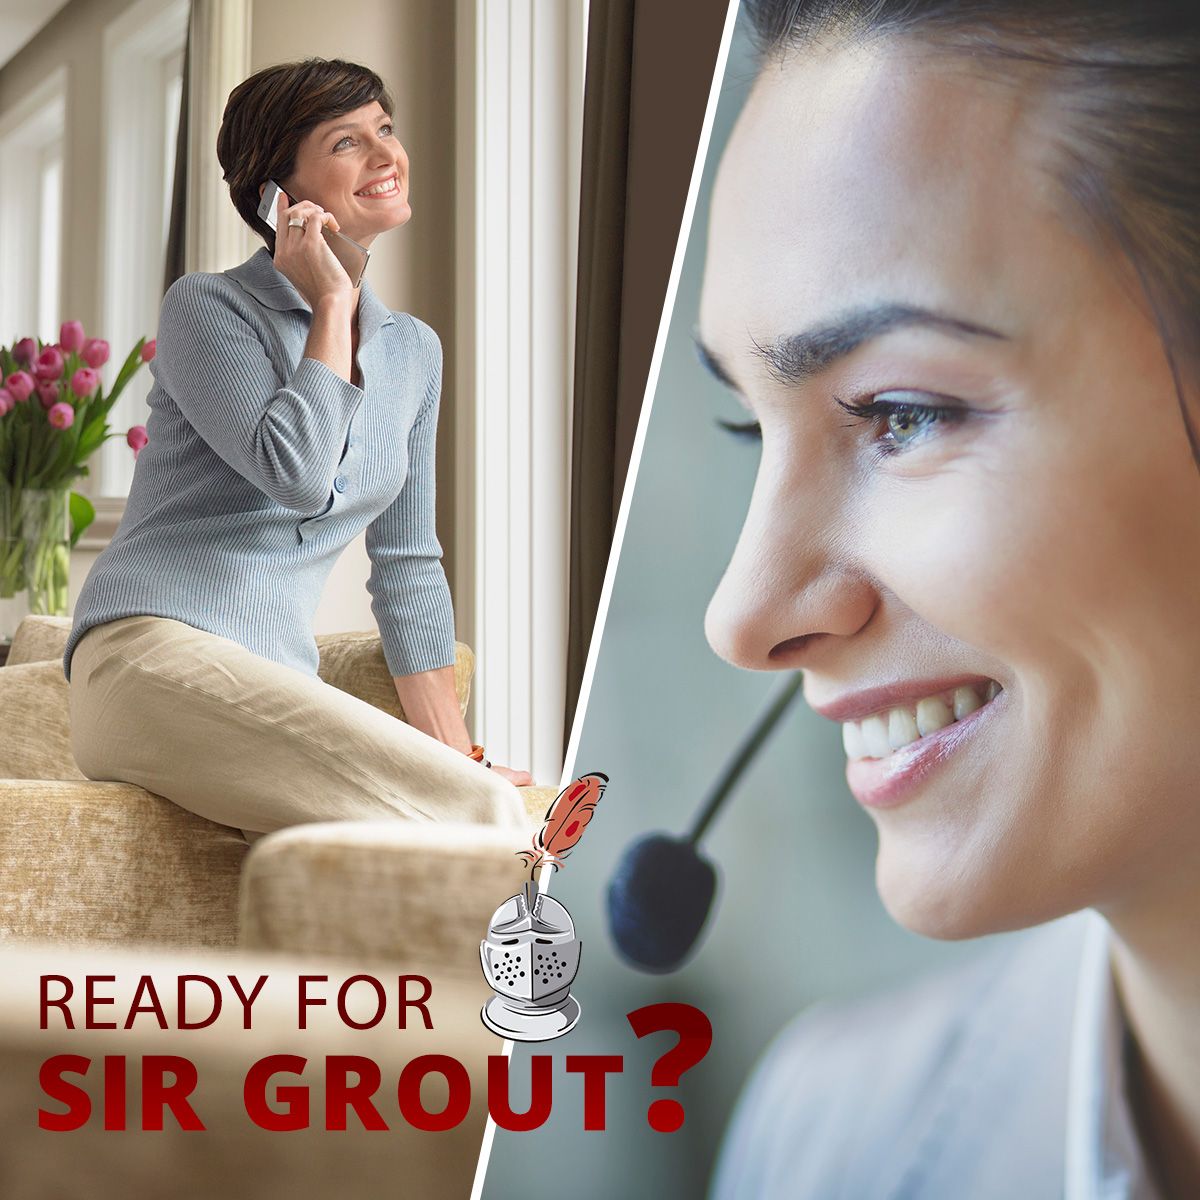 Ready for Sir Grout?